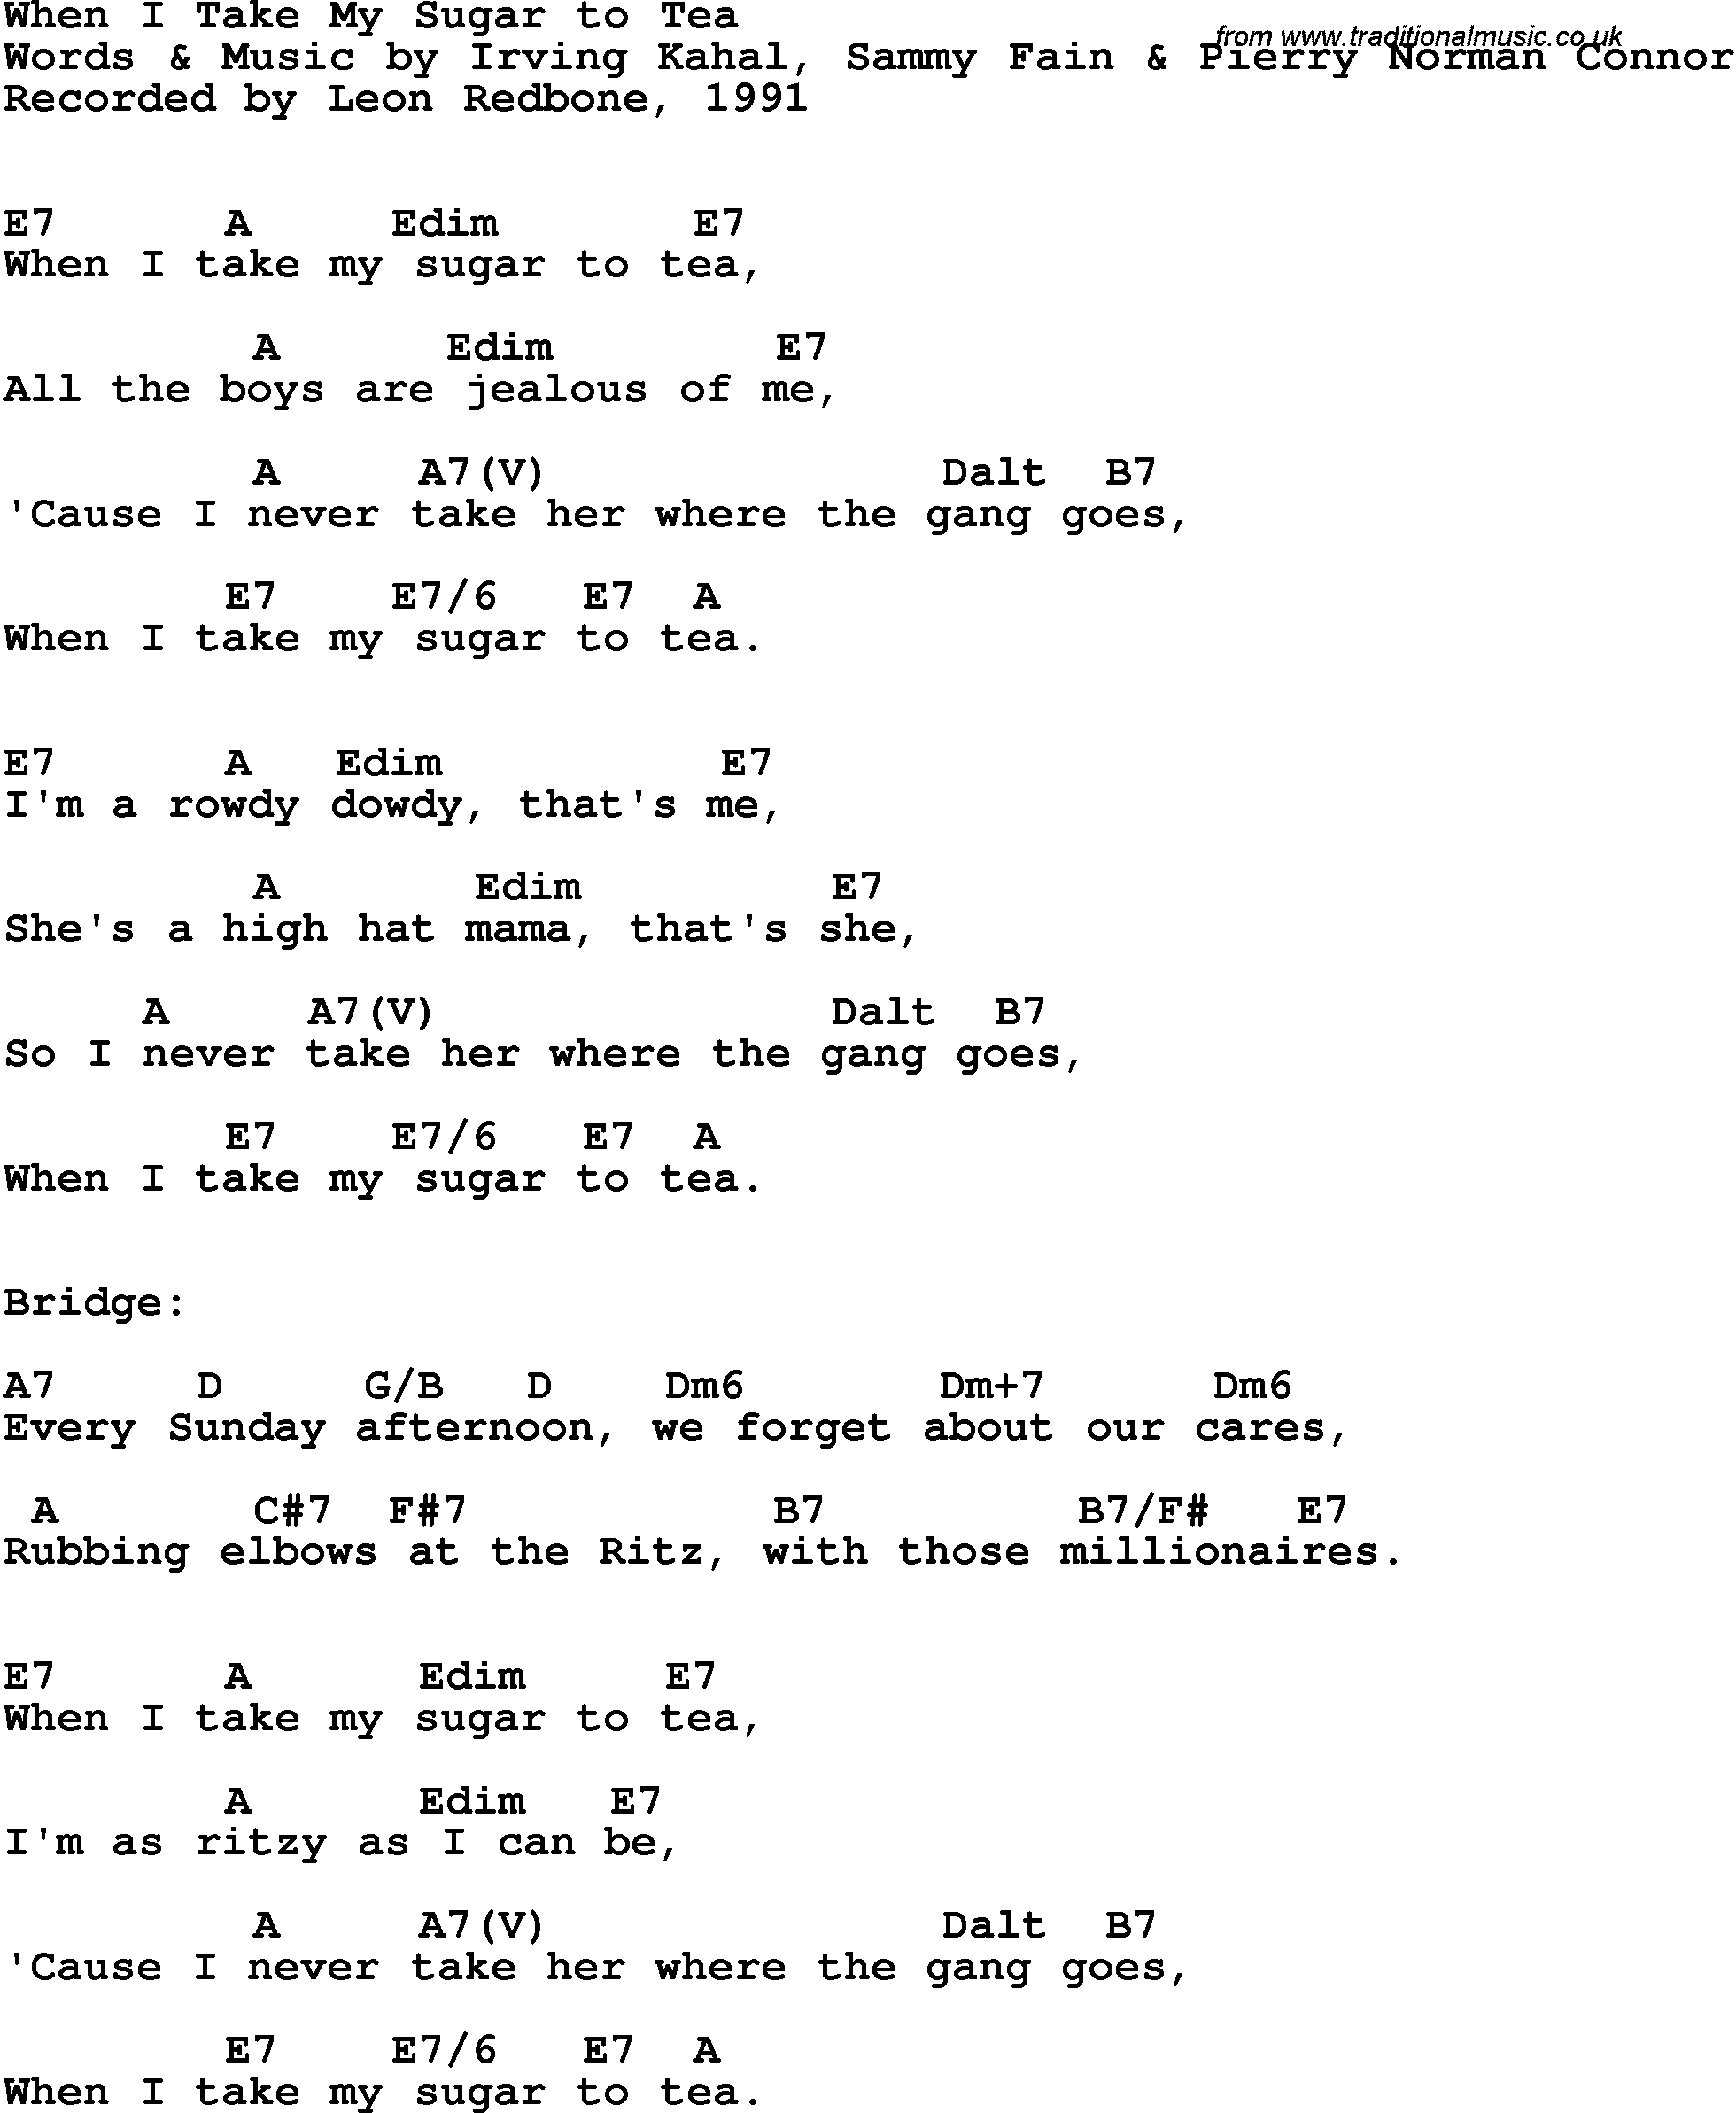 Song Lyrics with guitar chords for When I Take My Sugar To Tea - Leon  Redbone, 1991